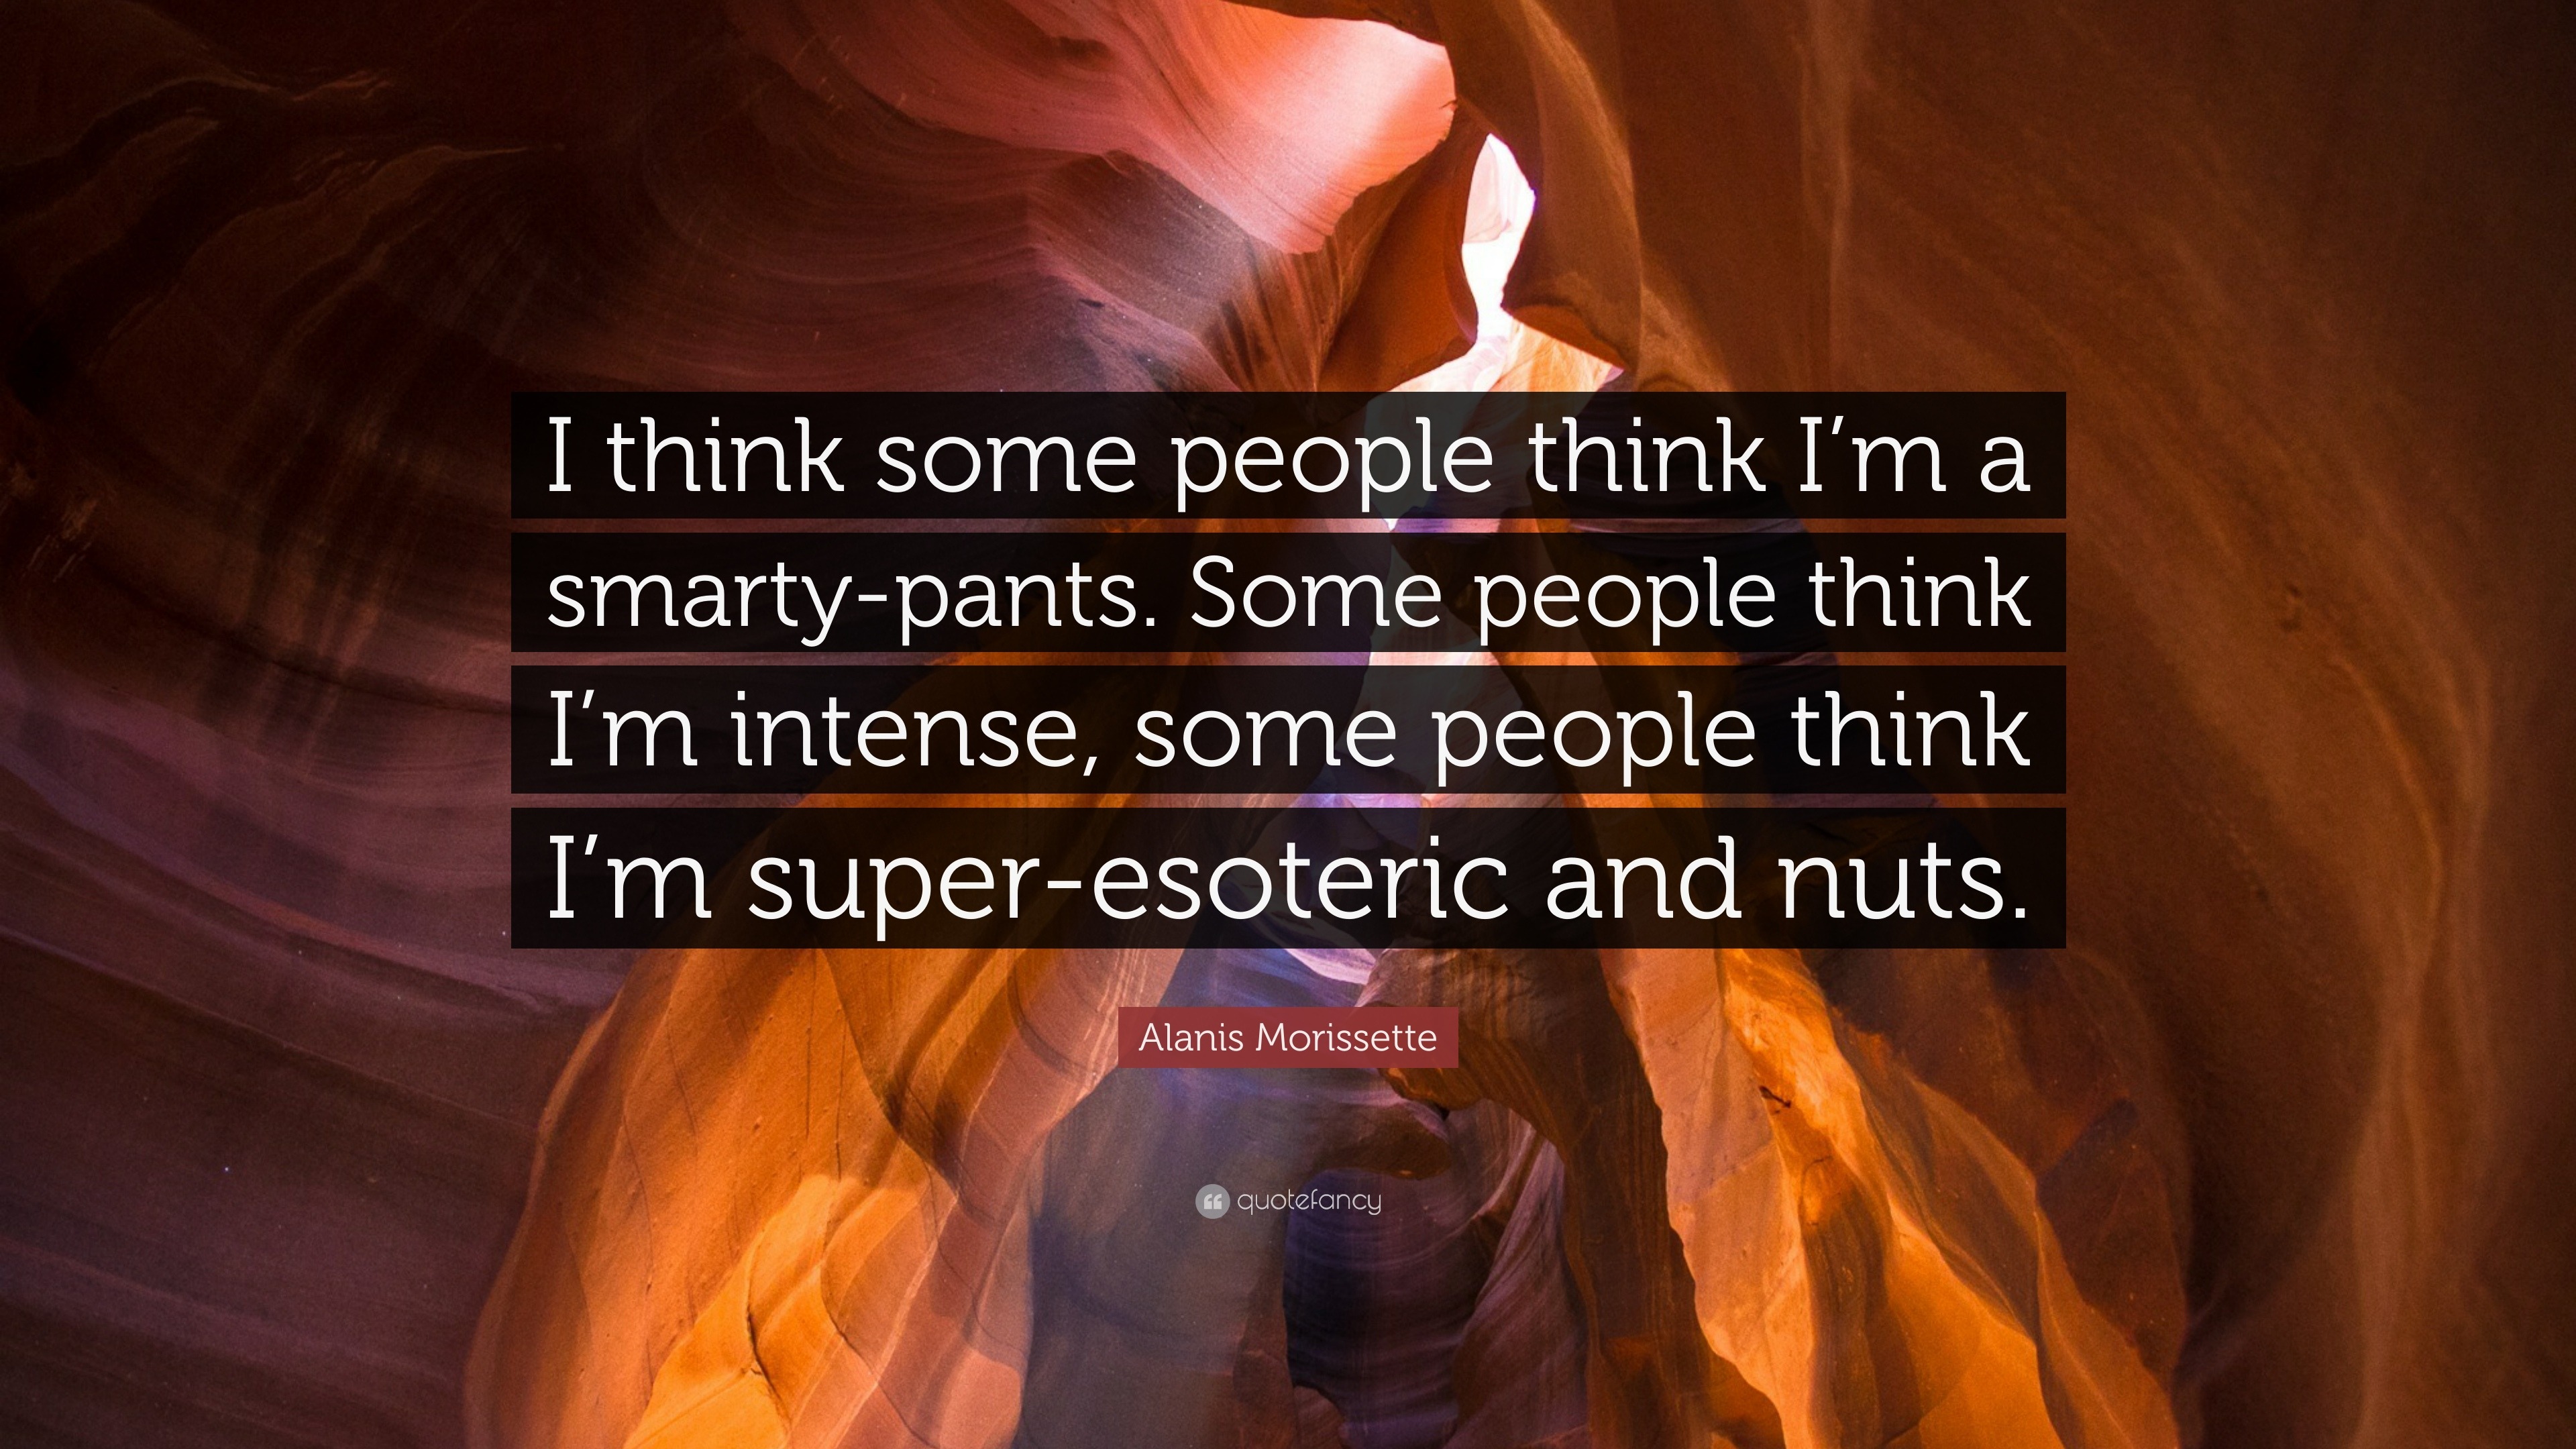 Alanis Morissette Quote I think some people think Im a smartypants  Some people think Im intense some people think Im superesoteric and  nu